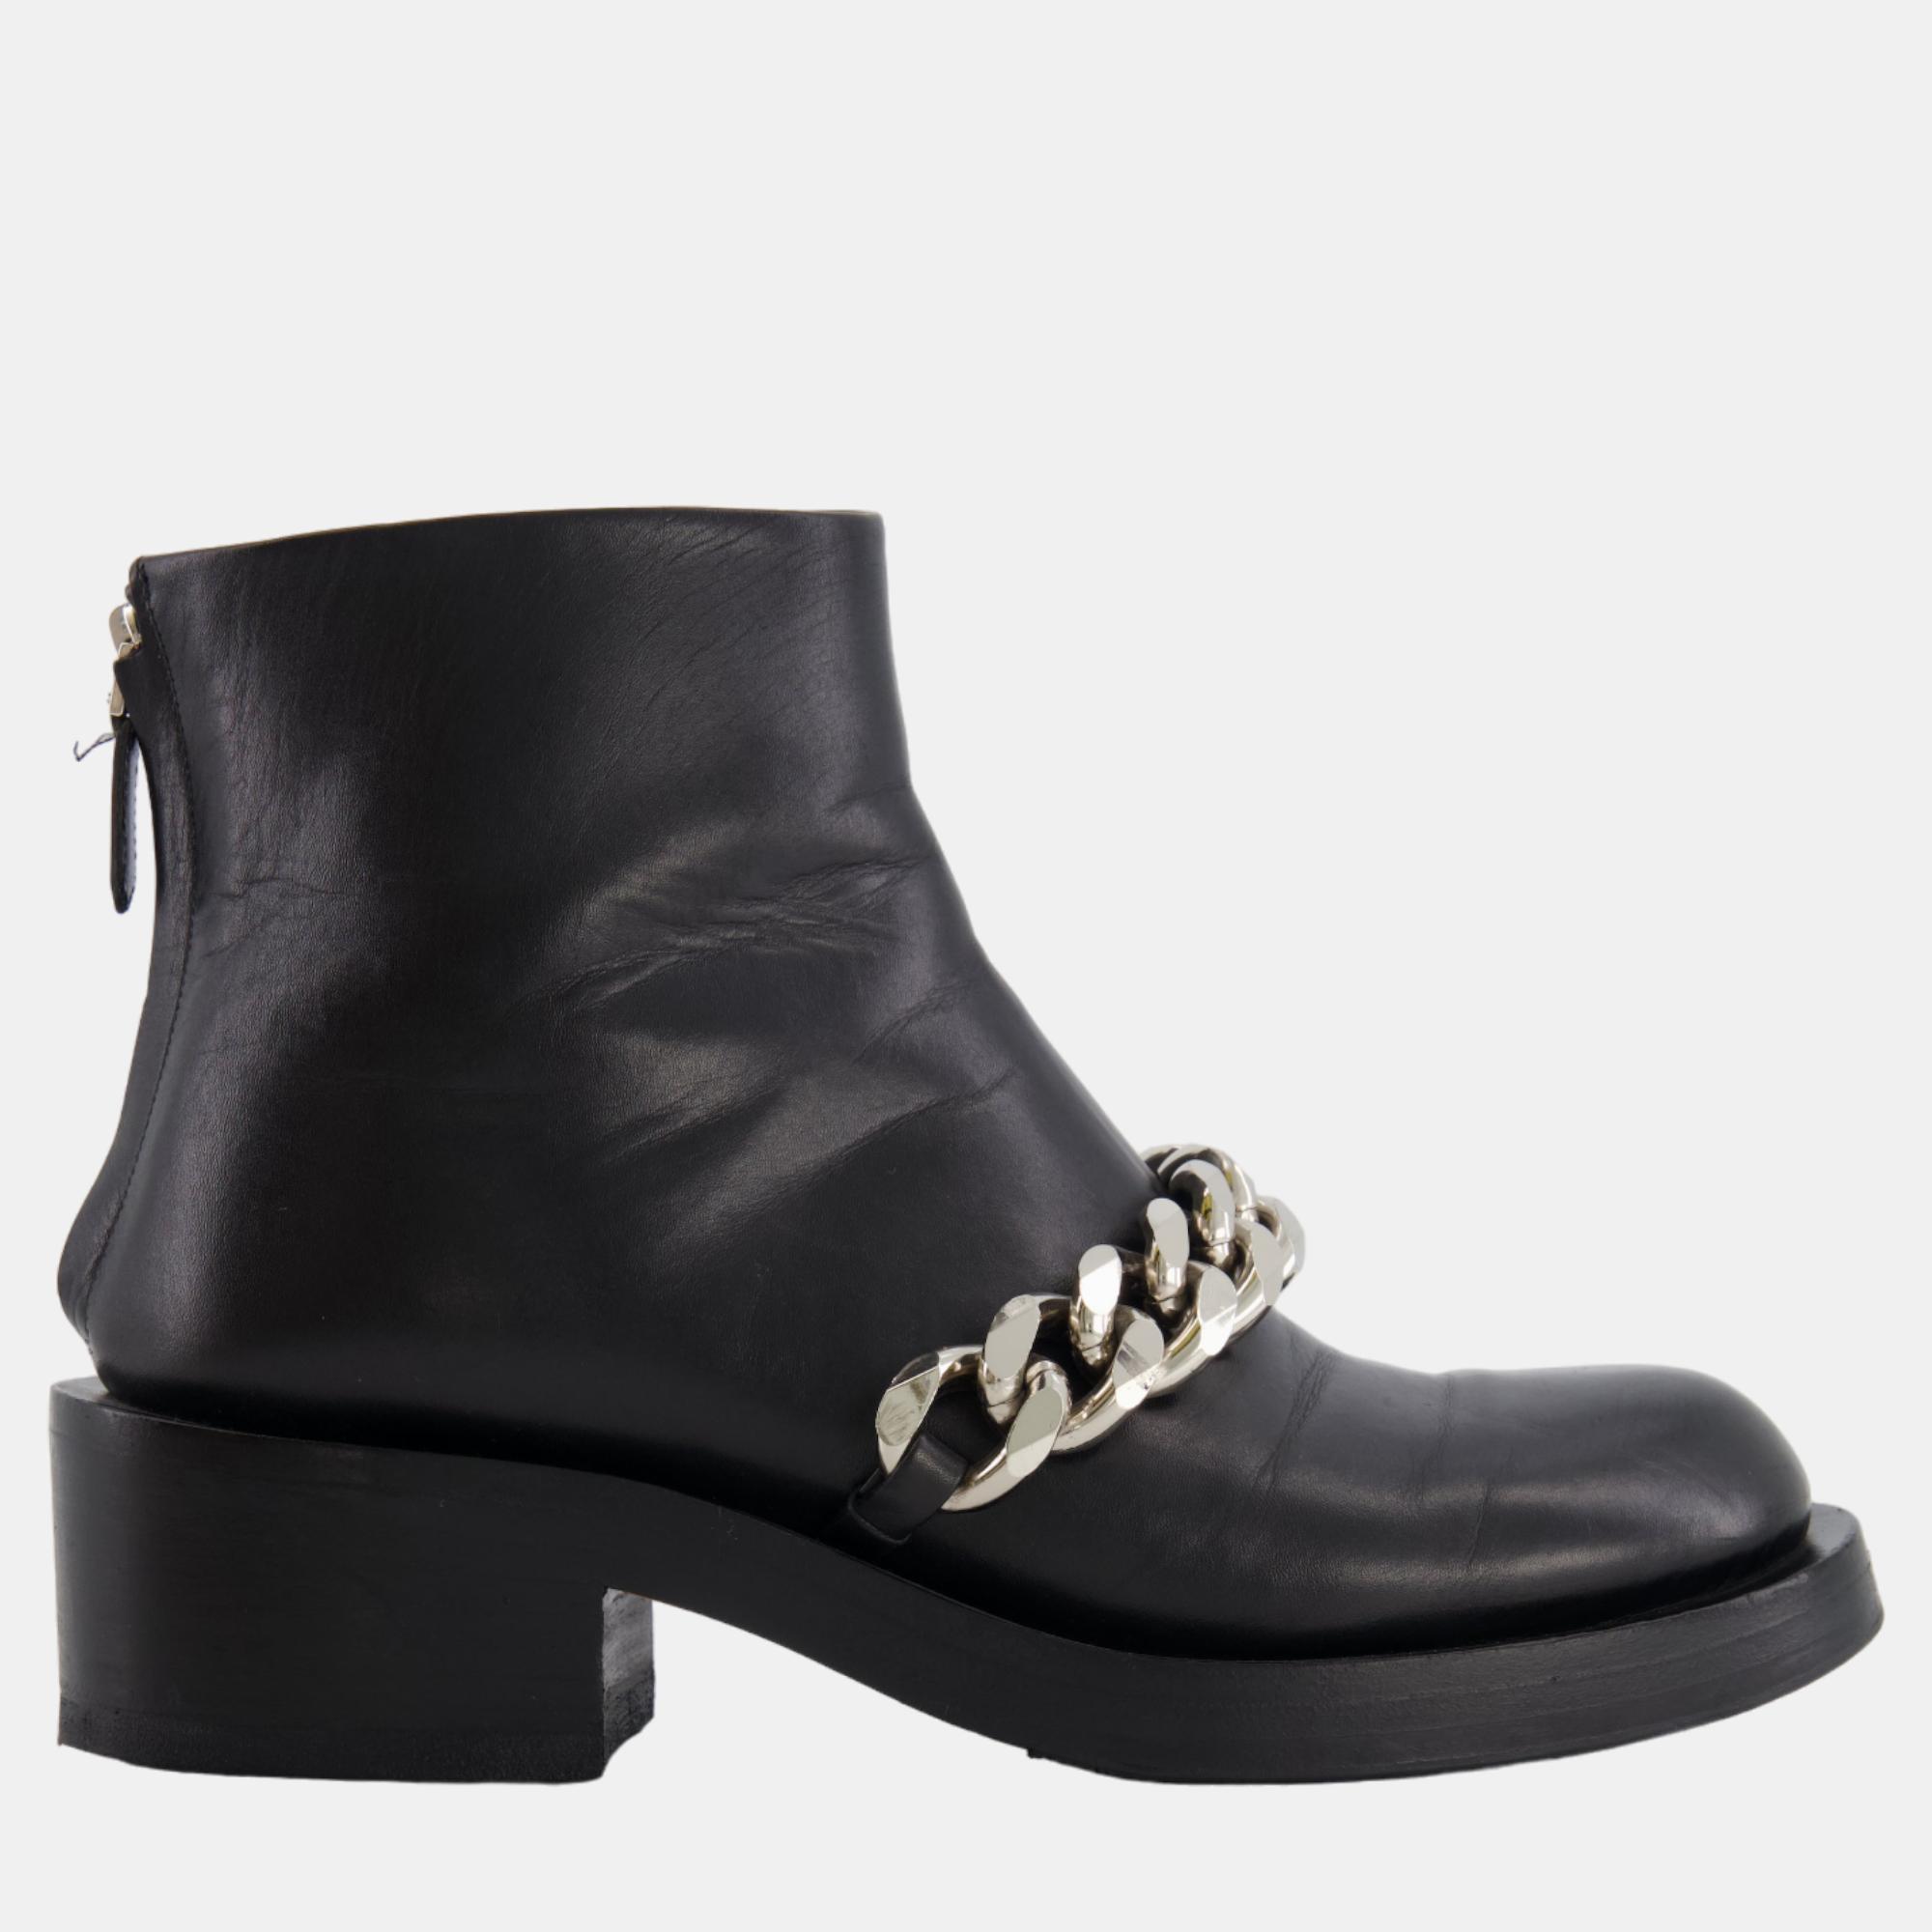 Givenchy black leather flat boots with silver chain detail size eu 36.5